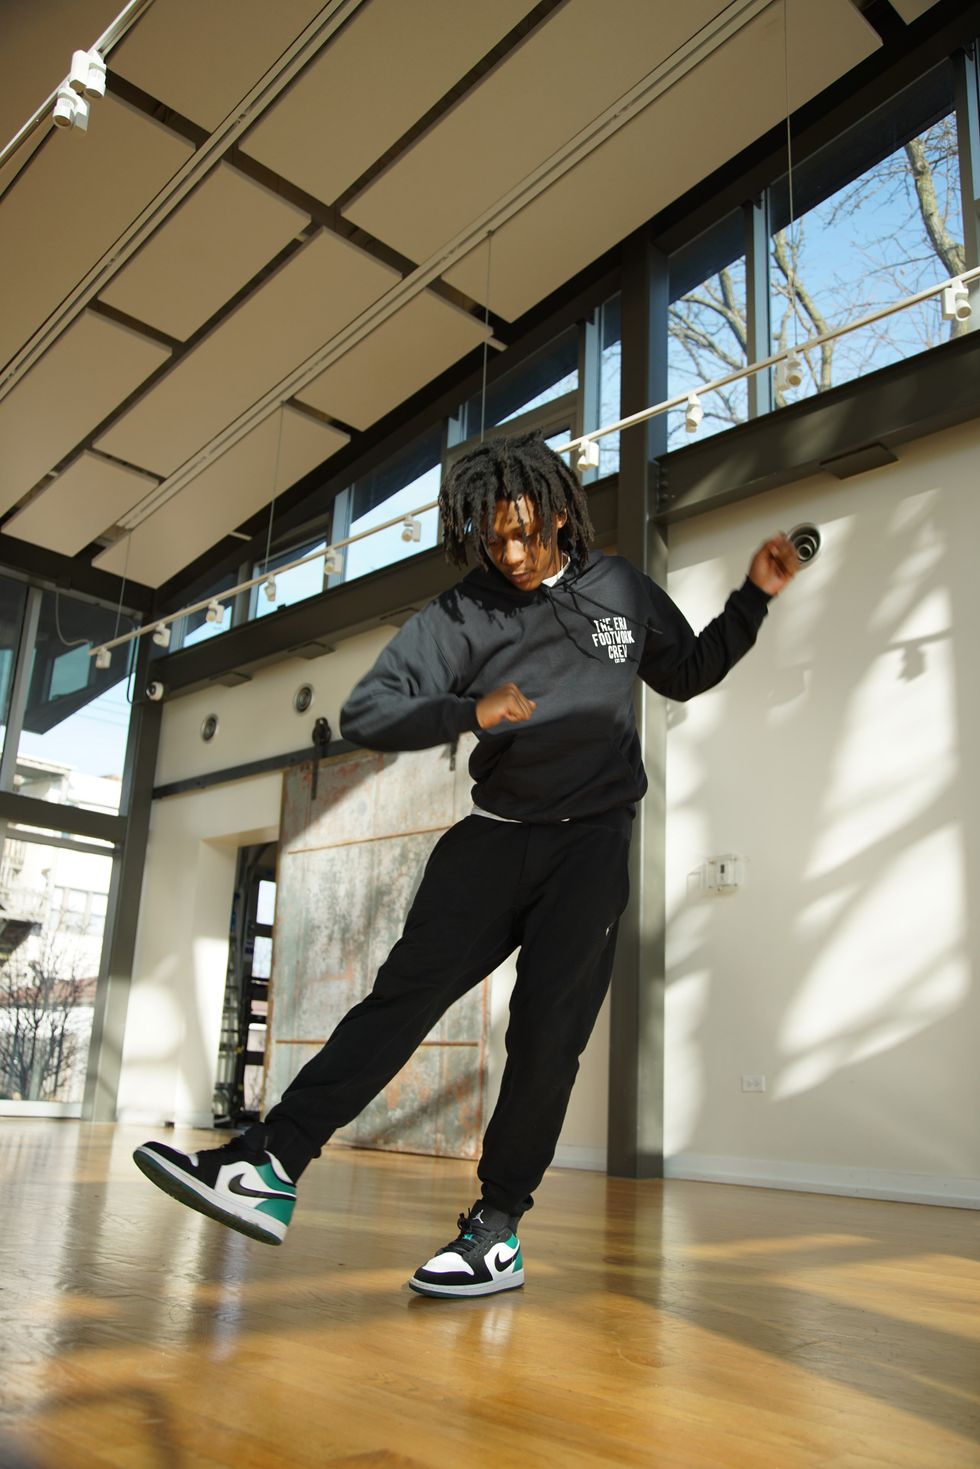 Sterling "Steelo" Lofton, a Black man with chin-length dreadlocks, tilts off center on one leg, watching his extended leg as it begins to cross center.